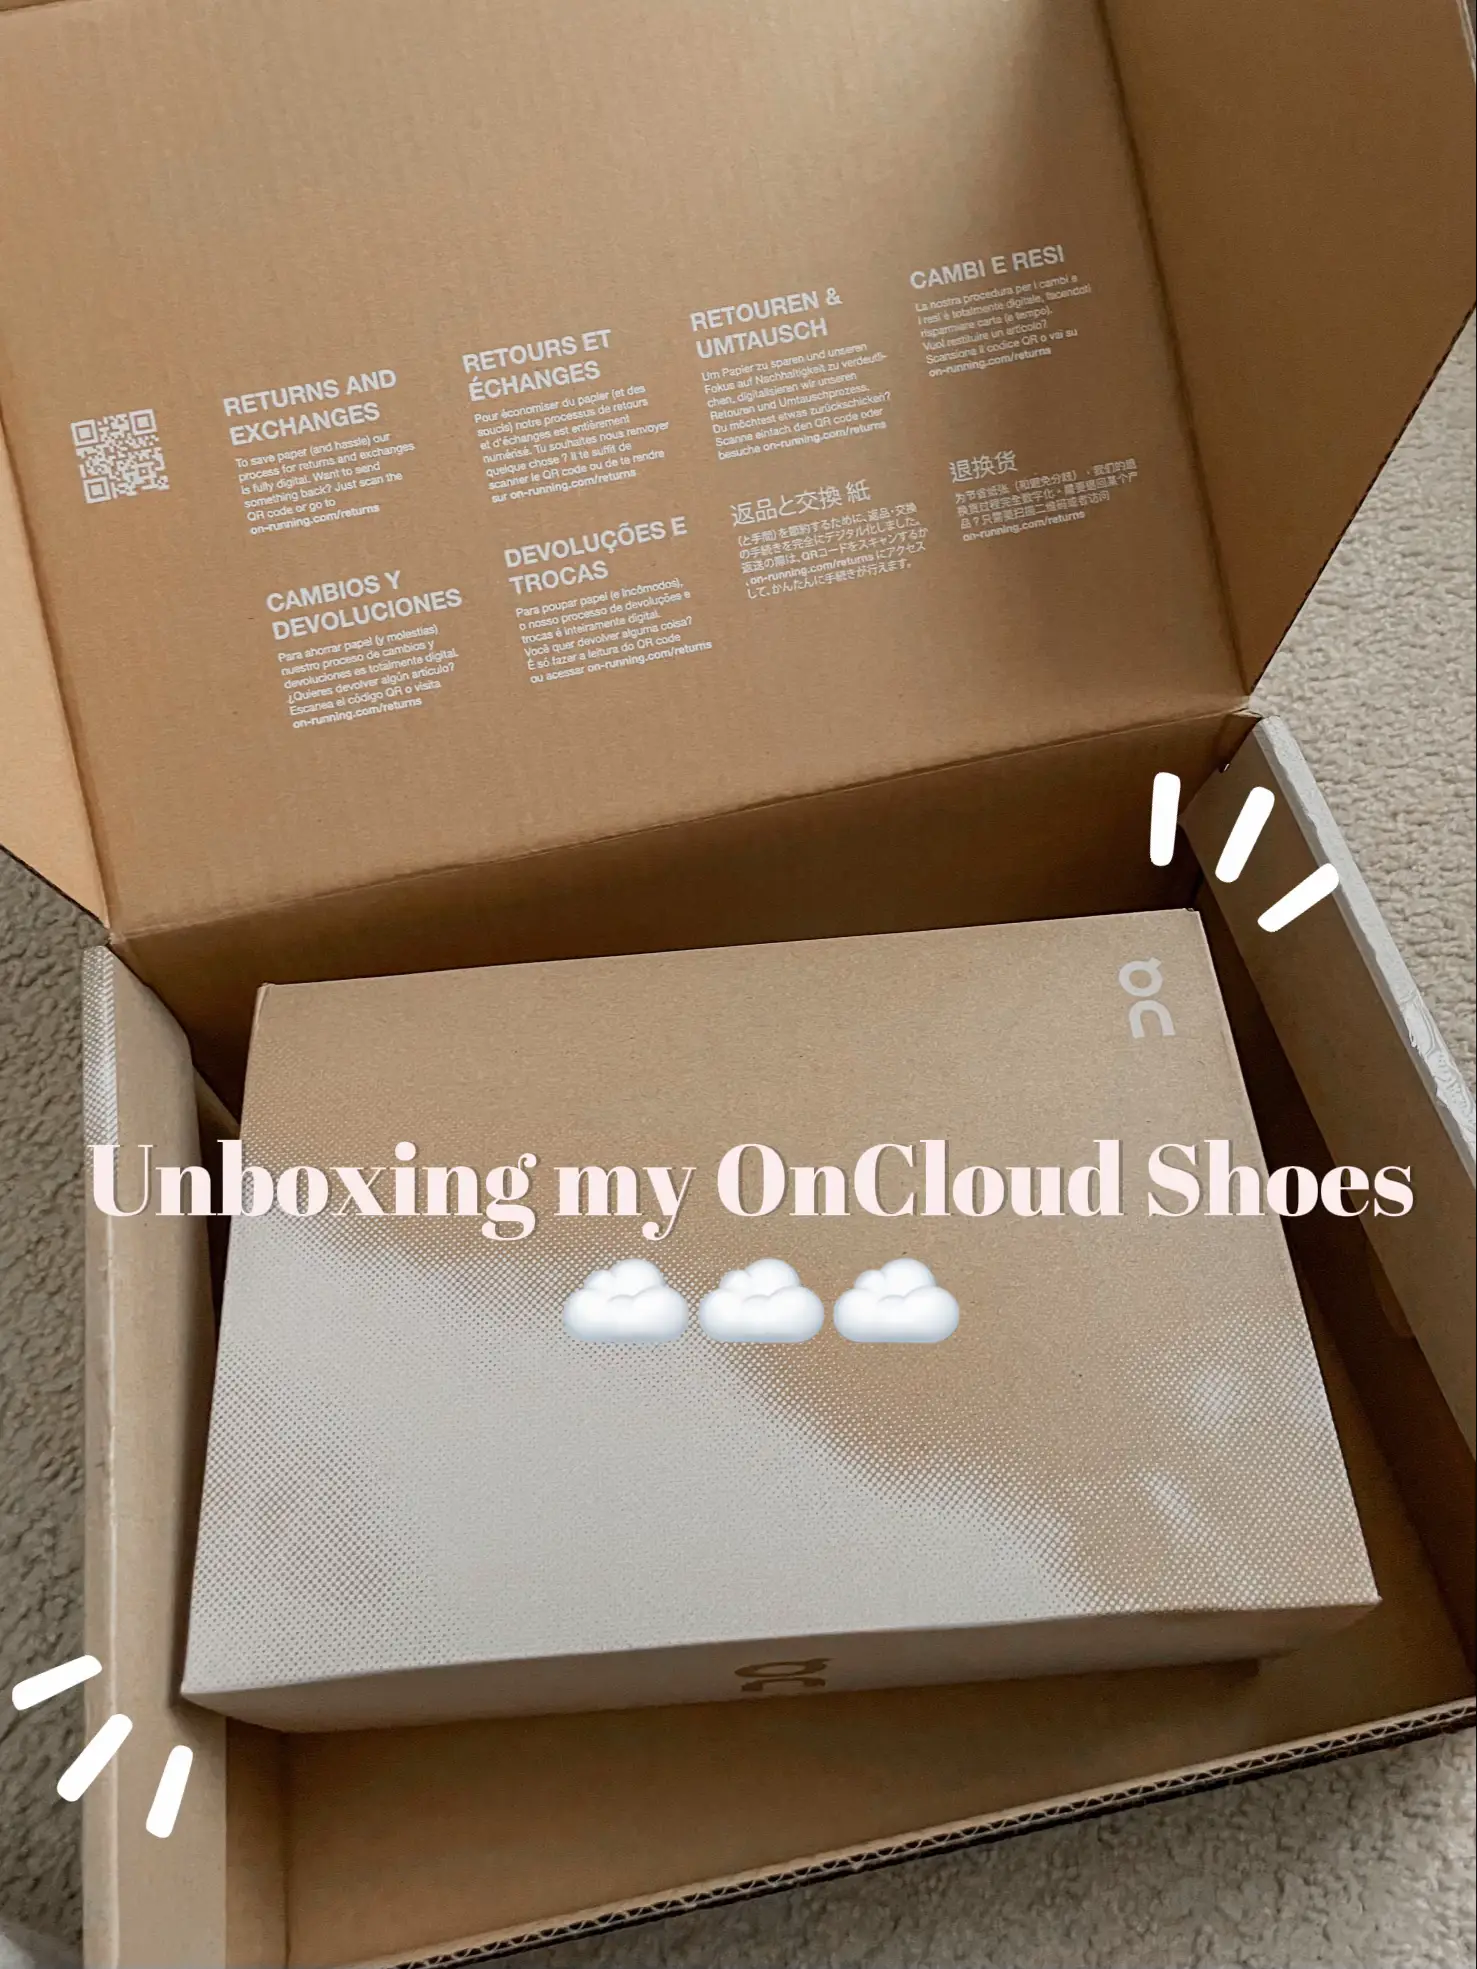 Oncloud shoes at costco｜TikTok Search